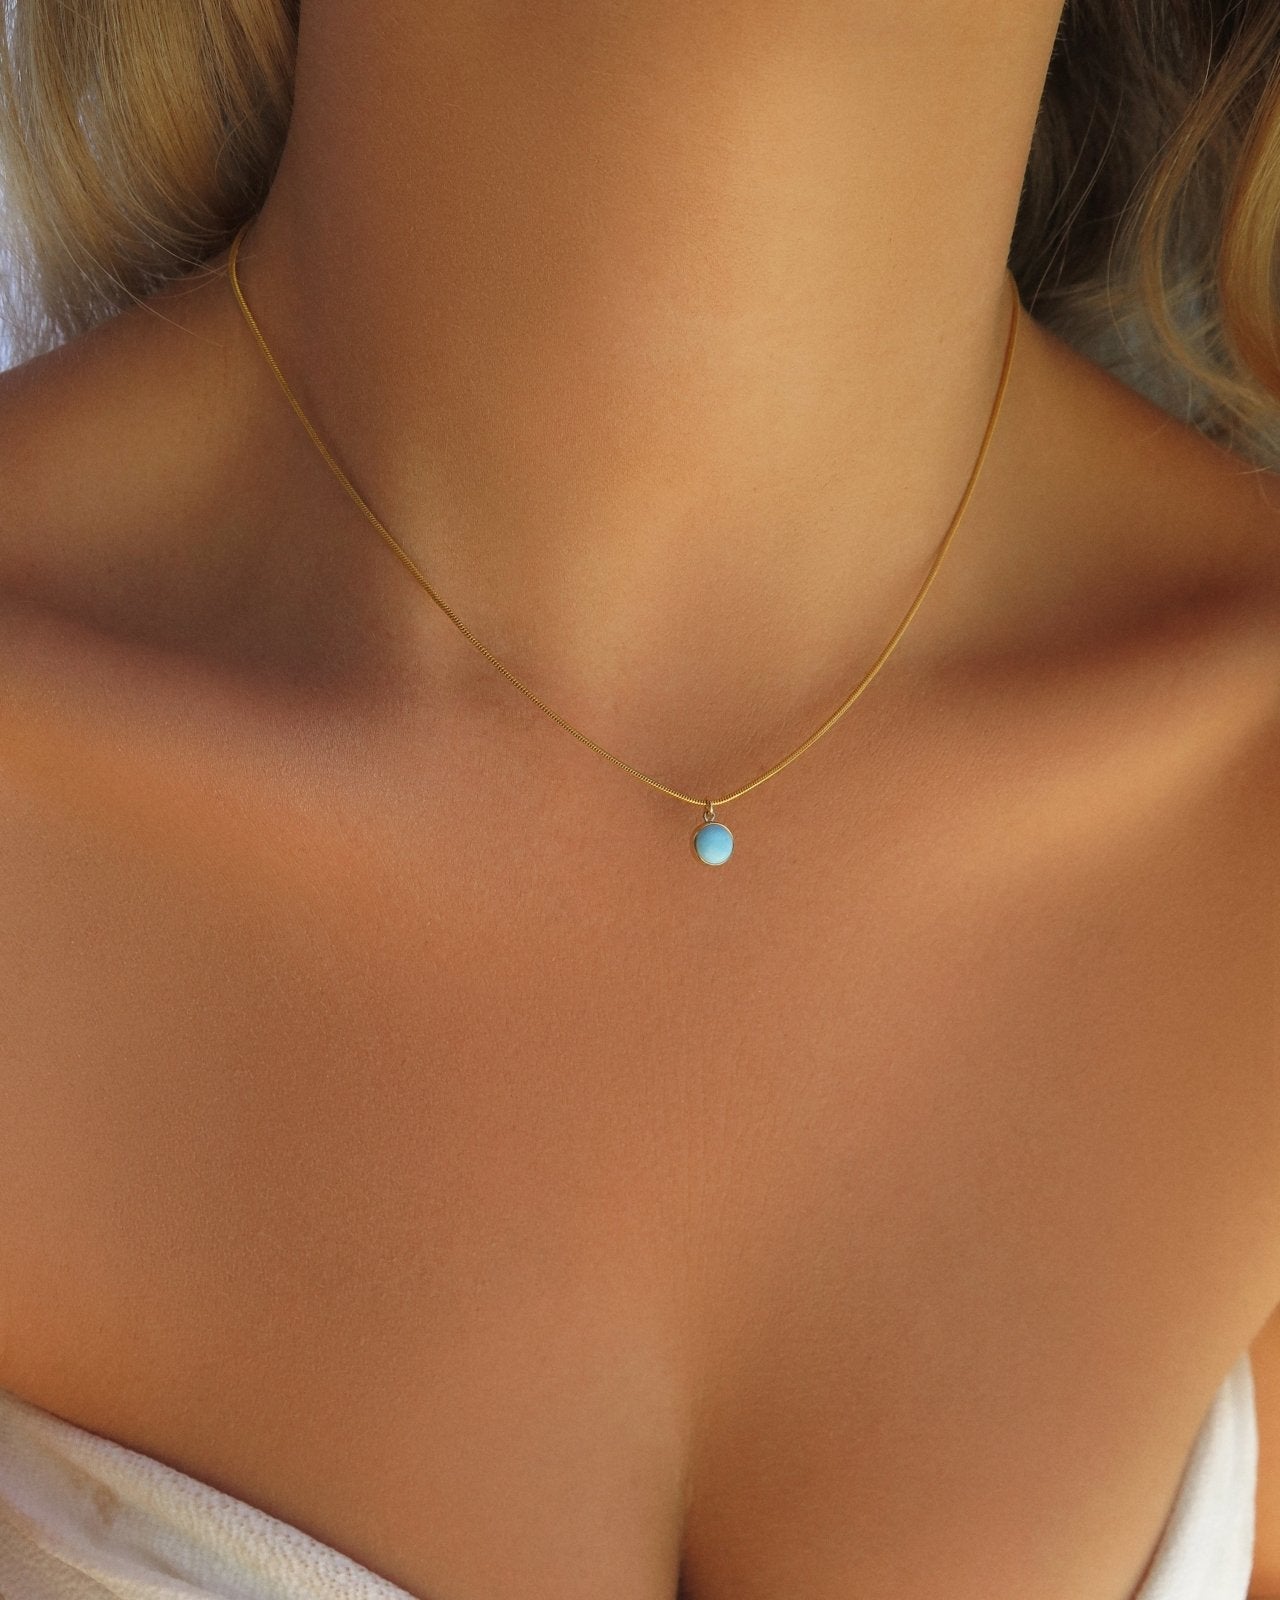 TURQUOISE SNAKE NECKLACE - 14k Yellow Gold - The Littl - 40.5cm (16 inches) -